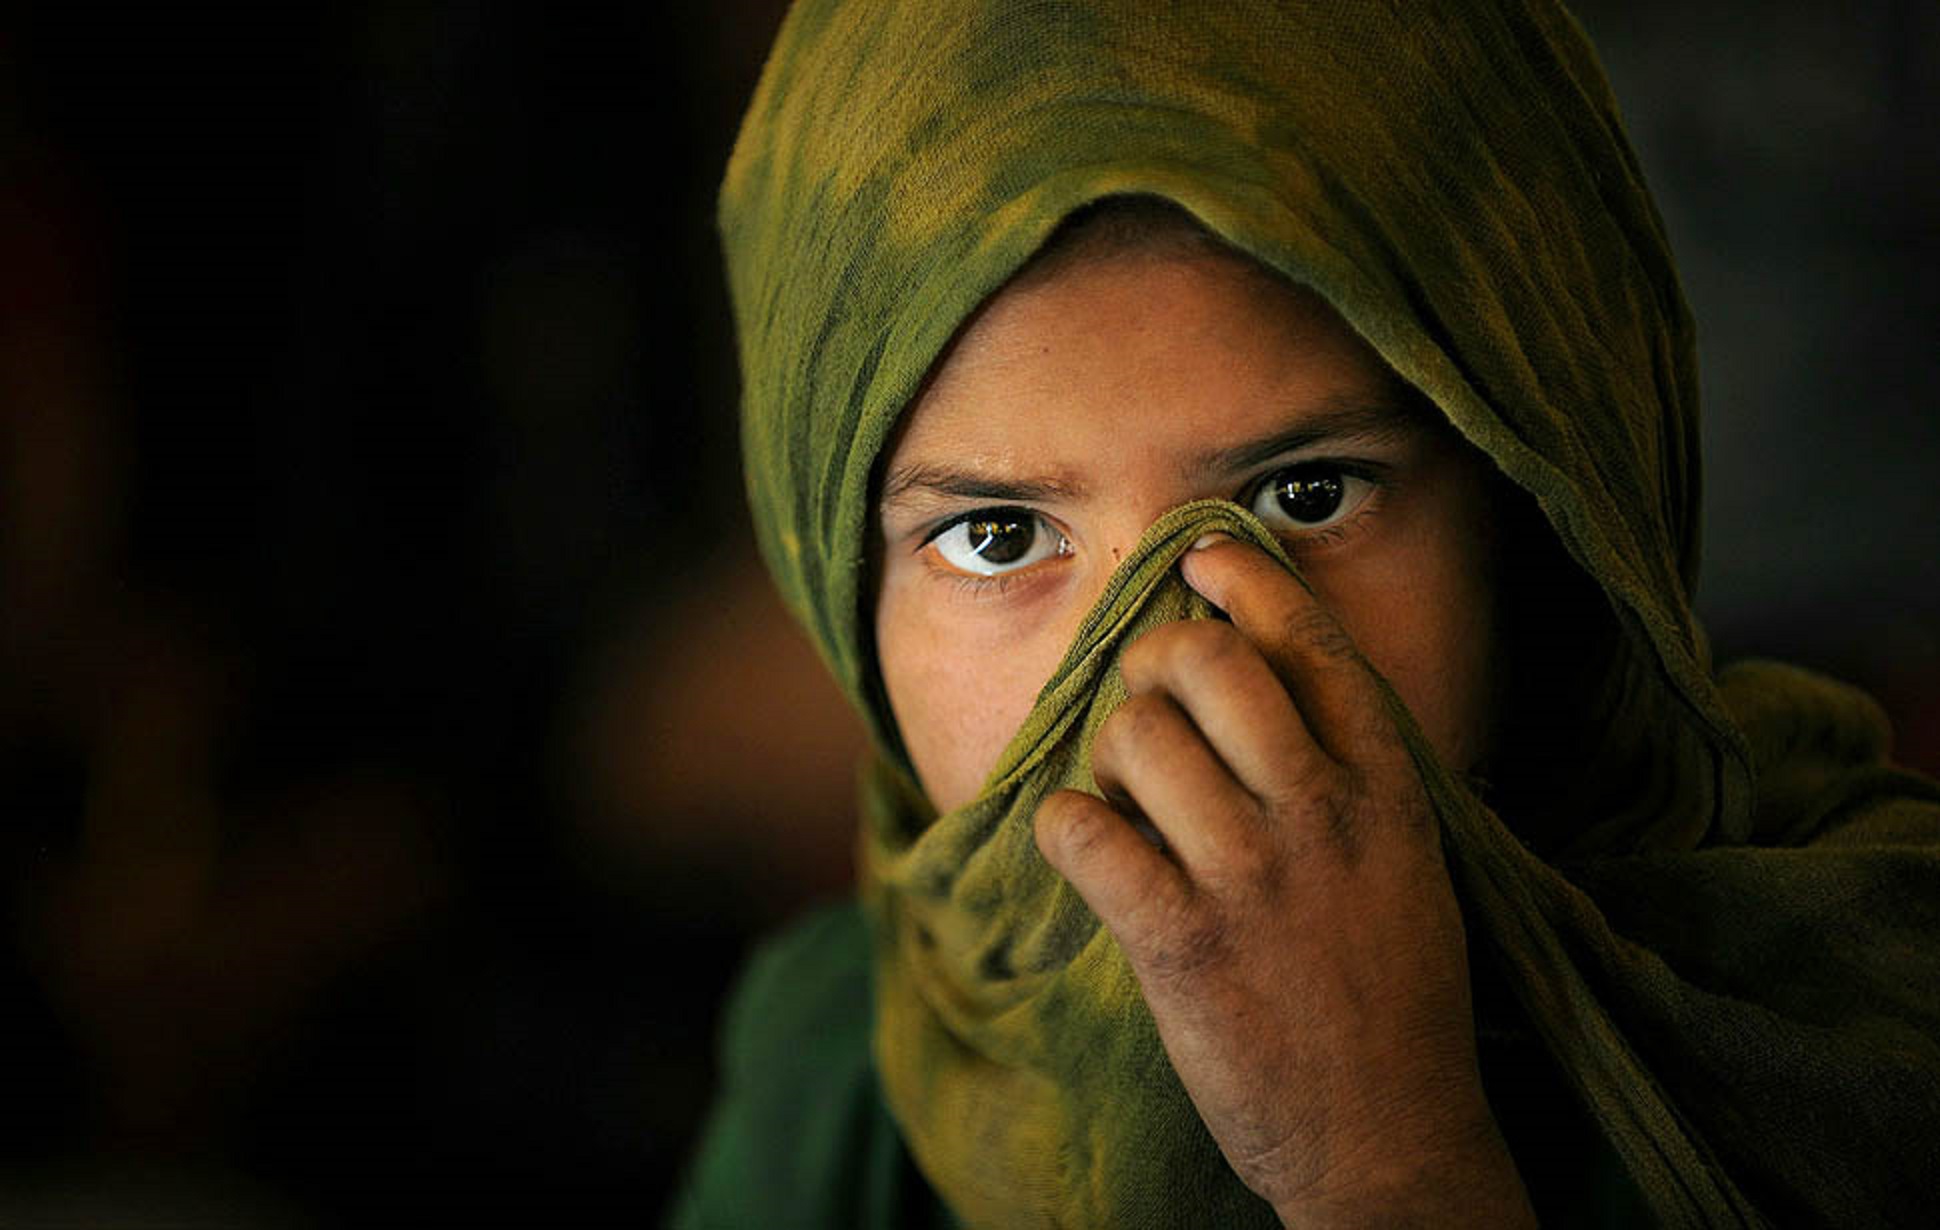 An Afghan Kuchi girl covers her face as